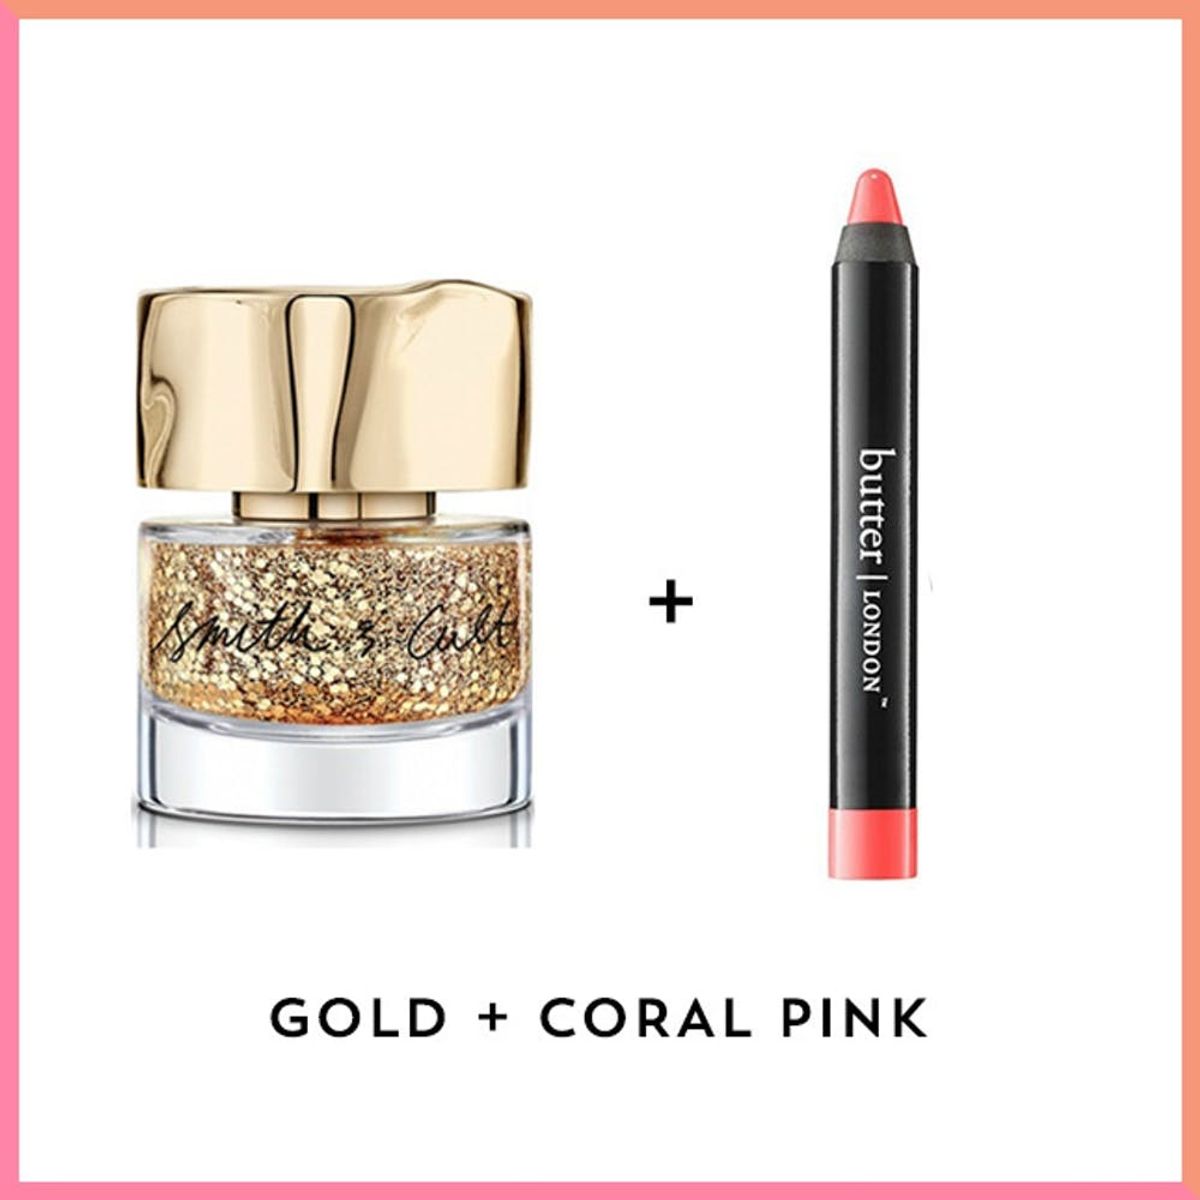 8 Unexpected Lipstick + Nail Polish Color Combos to Wear on Valentine’s Day